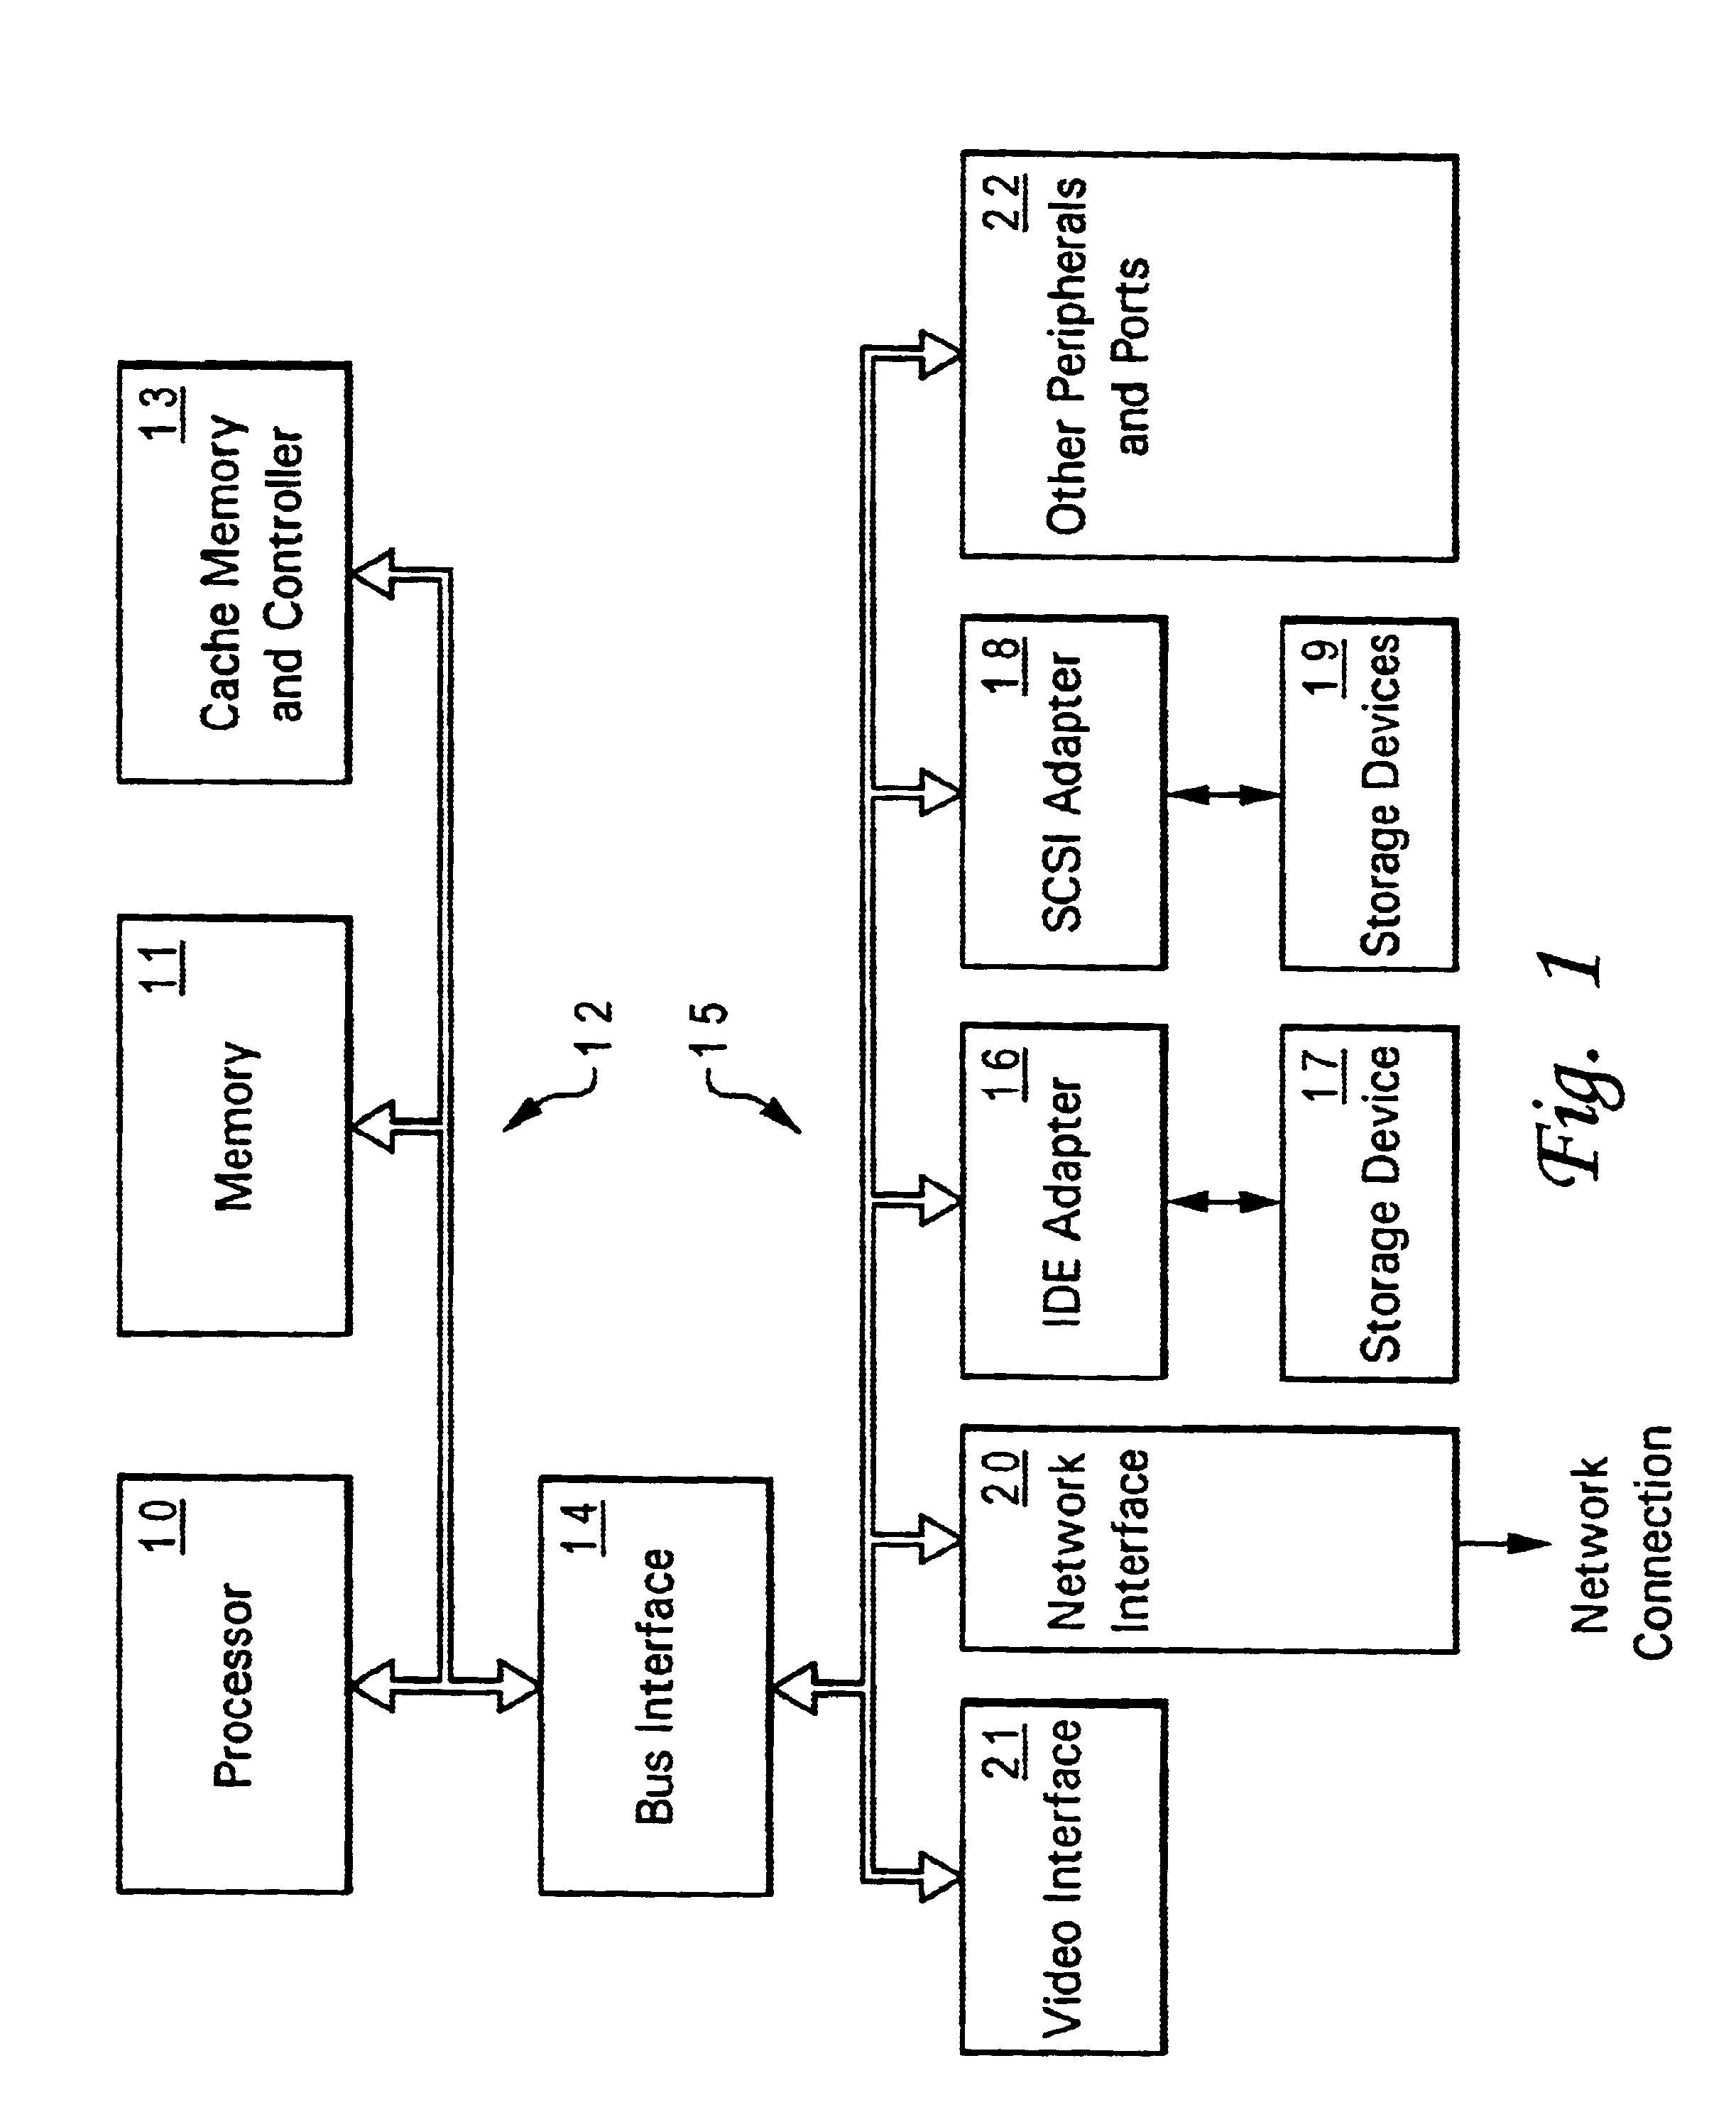 Method for replacing a device driver during system operation